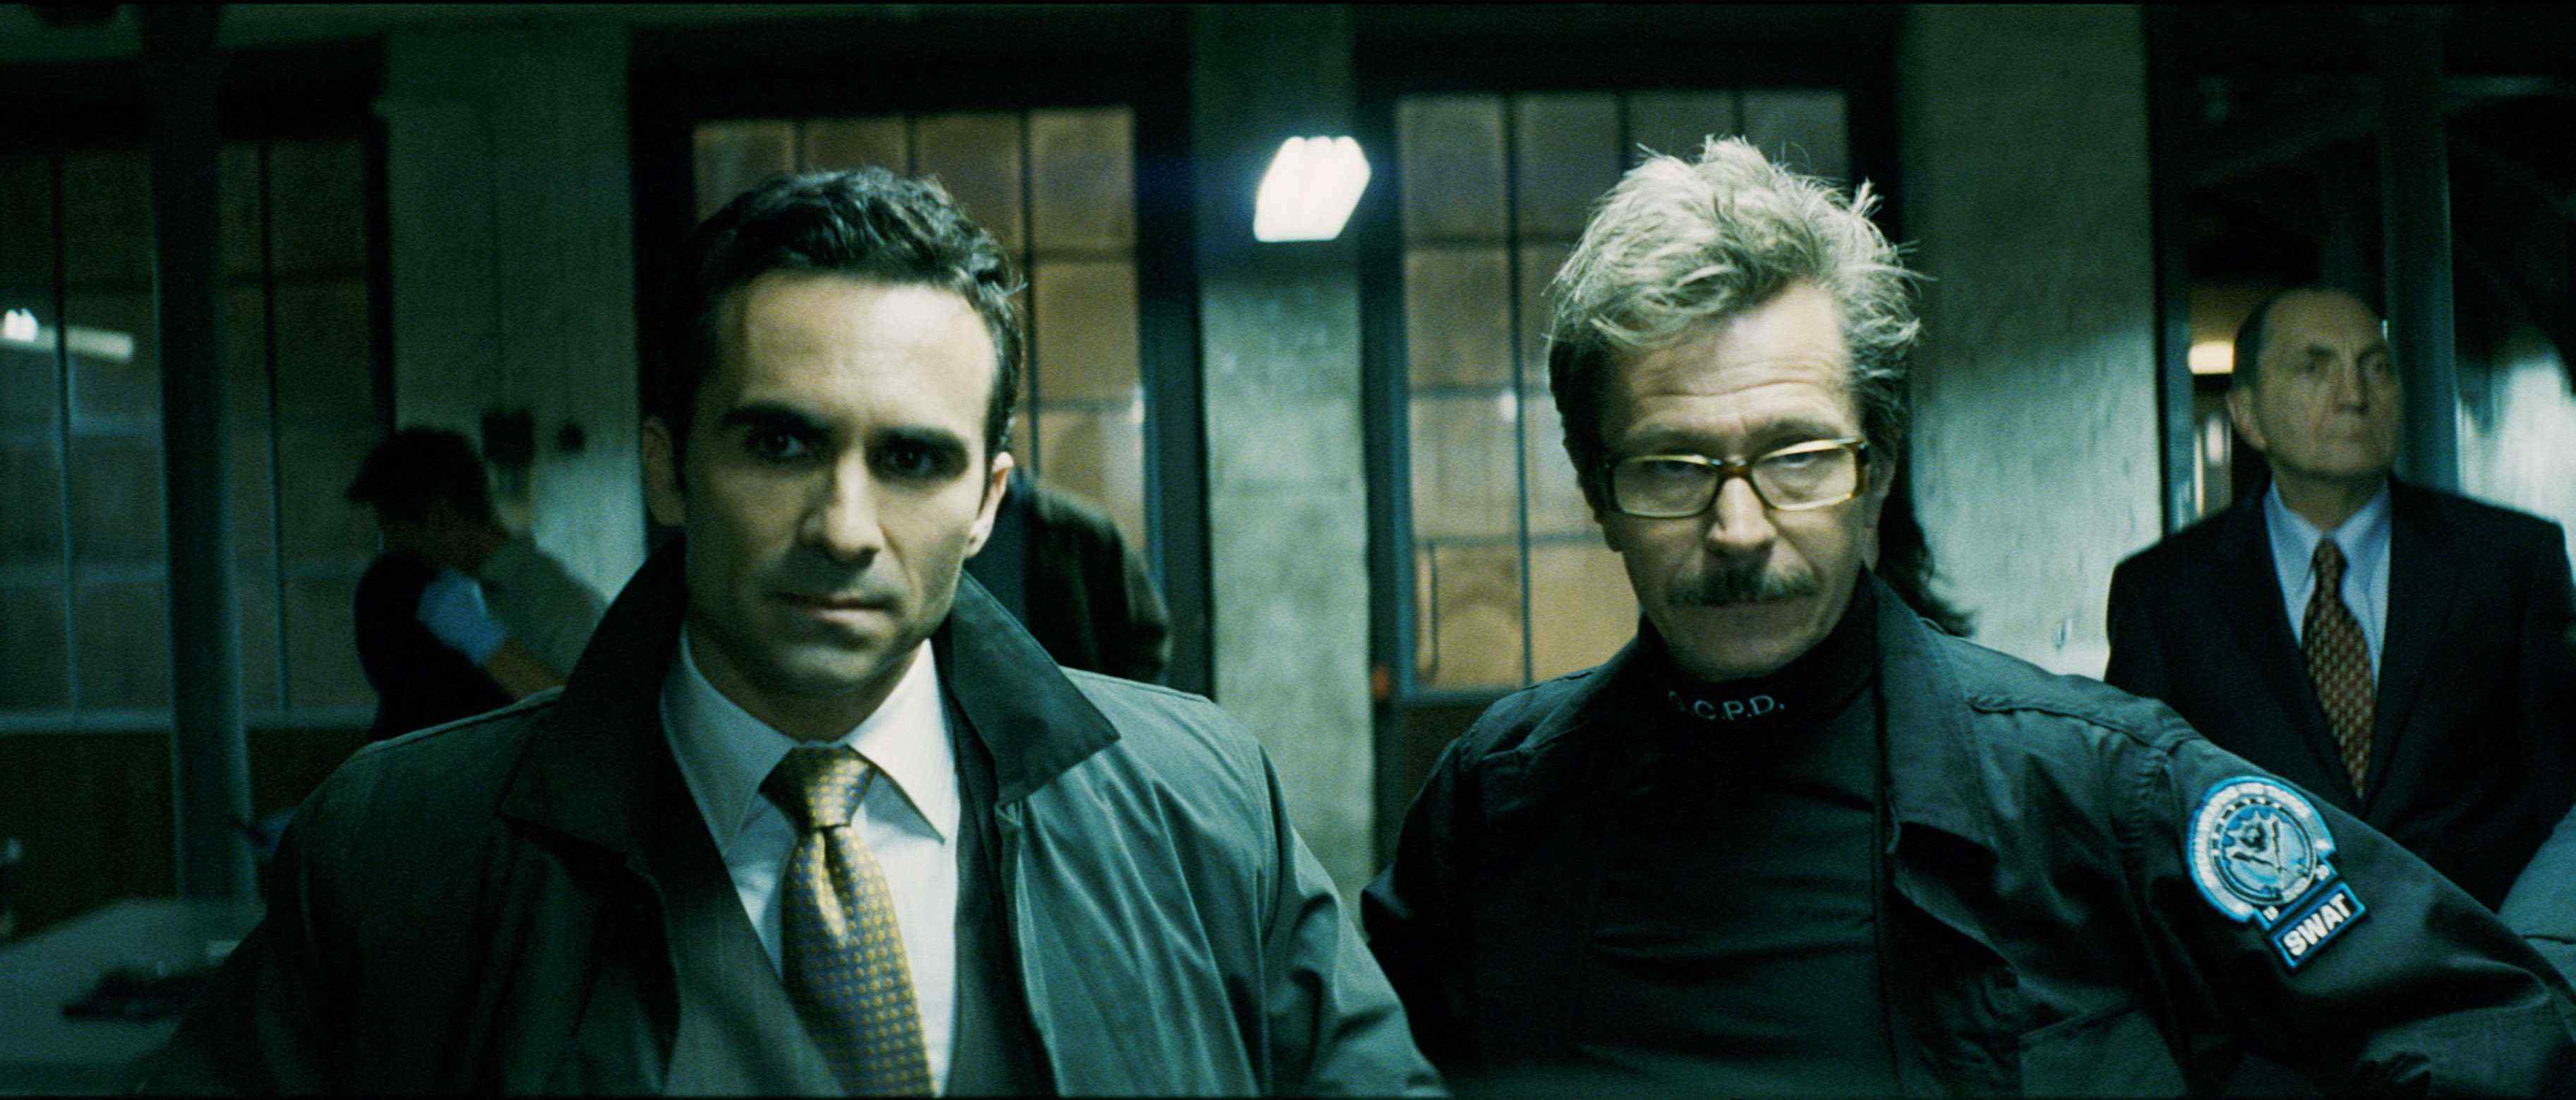 NESTOR CARBONELL stars as the Mayor and GARY OLDMAN stars as Lt. James Gordon in Warner Bros. Pictures' and Legendary Pictures' action drama 